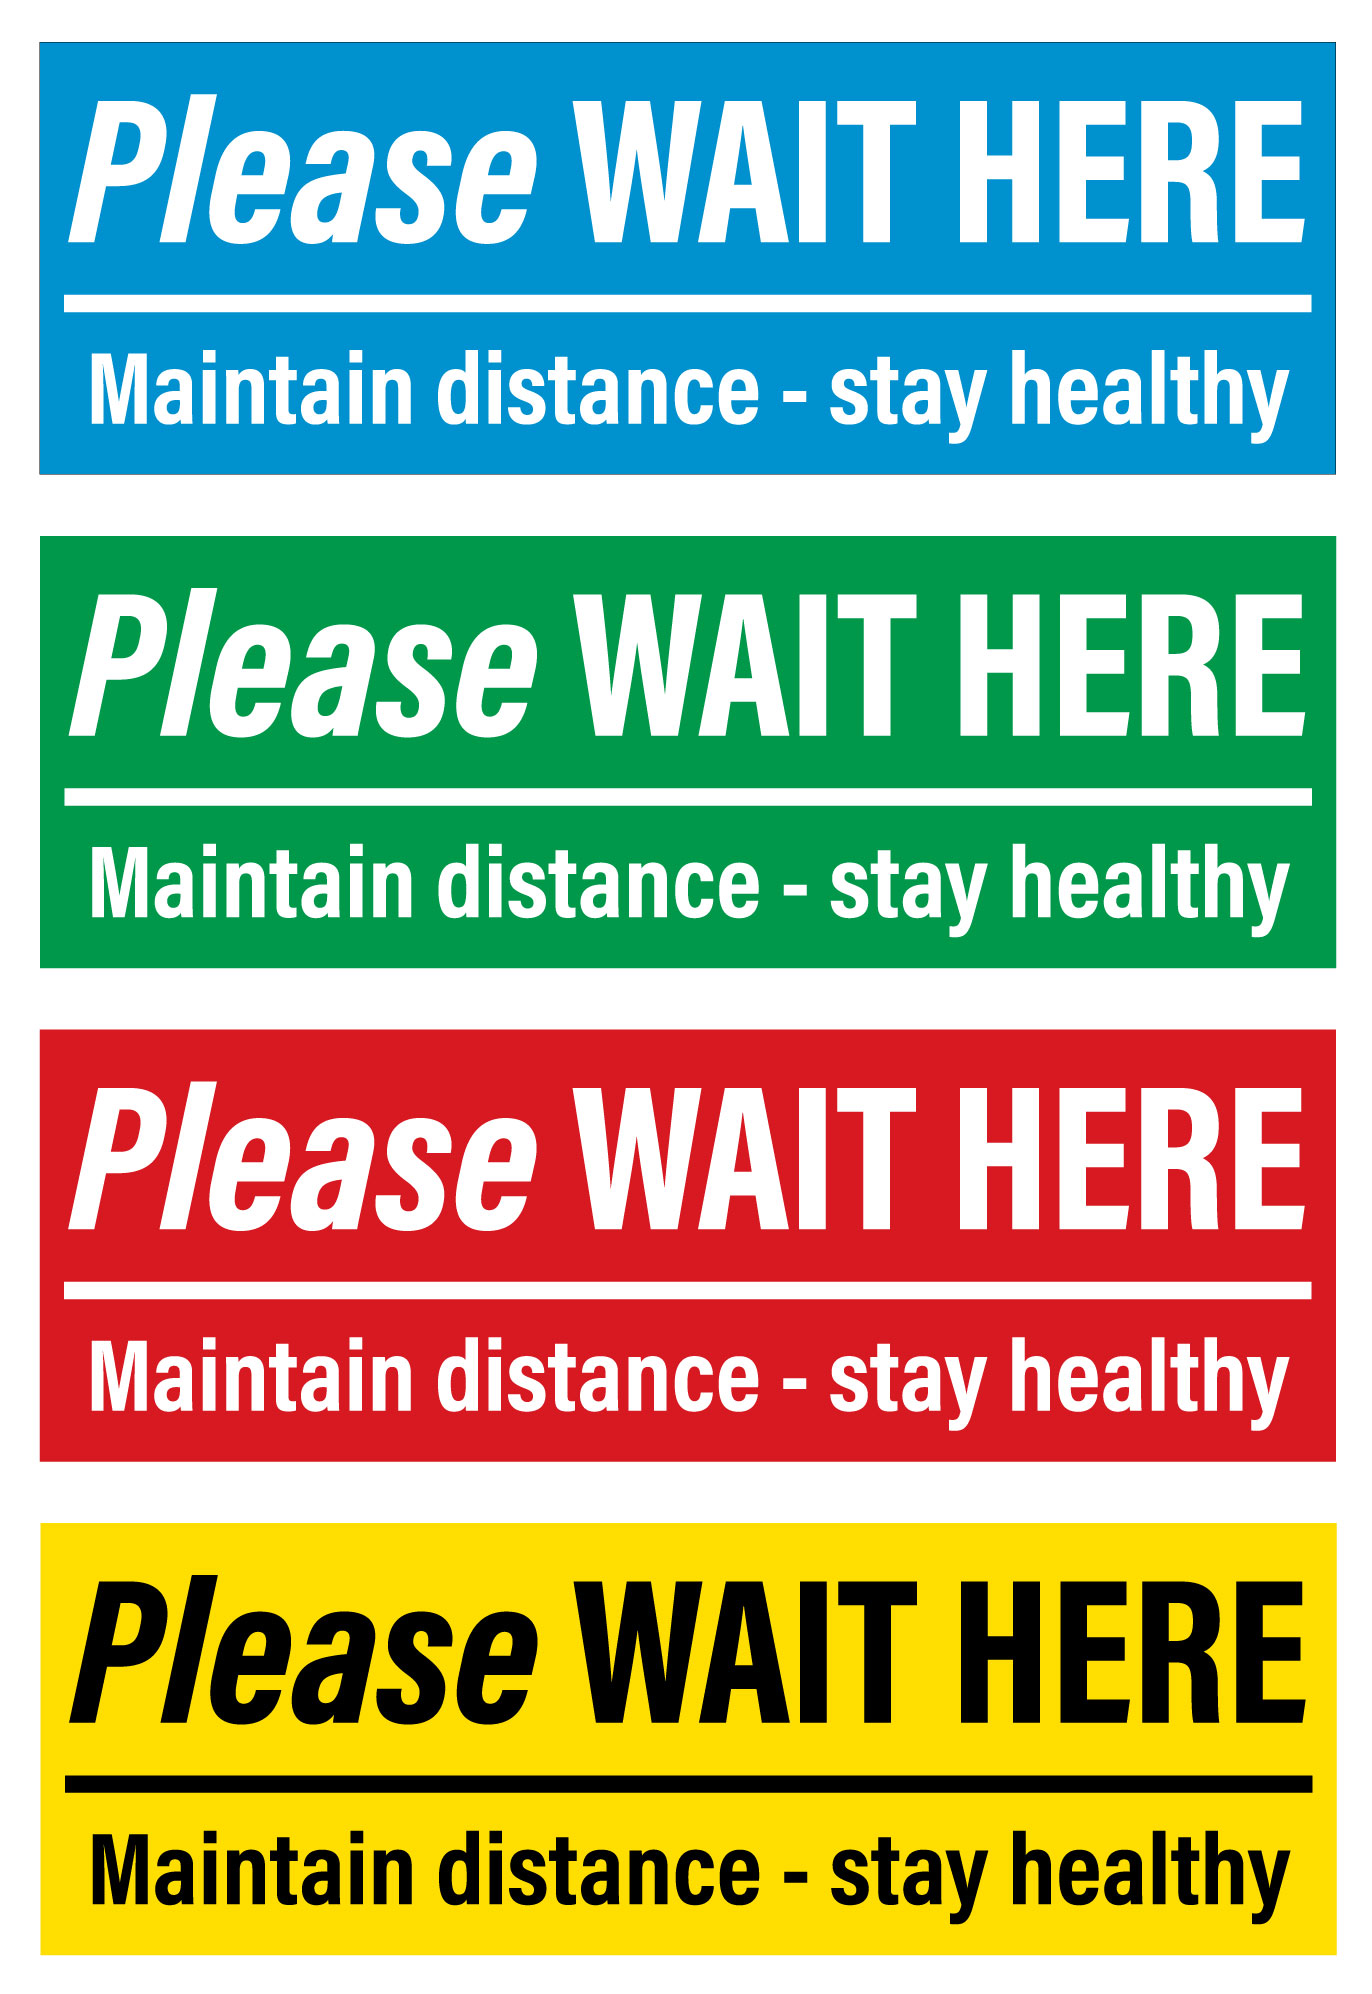 Please WAIT HERE Floor Graphics, 6”X18" (Specify color option in notes)